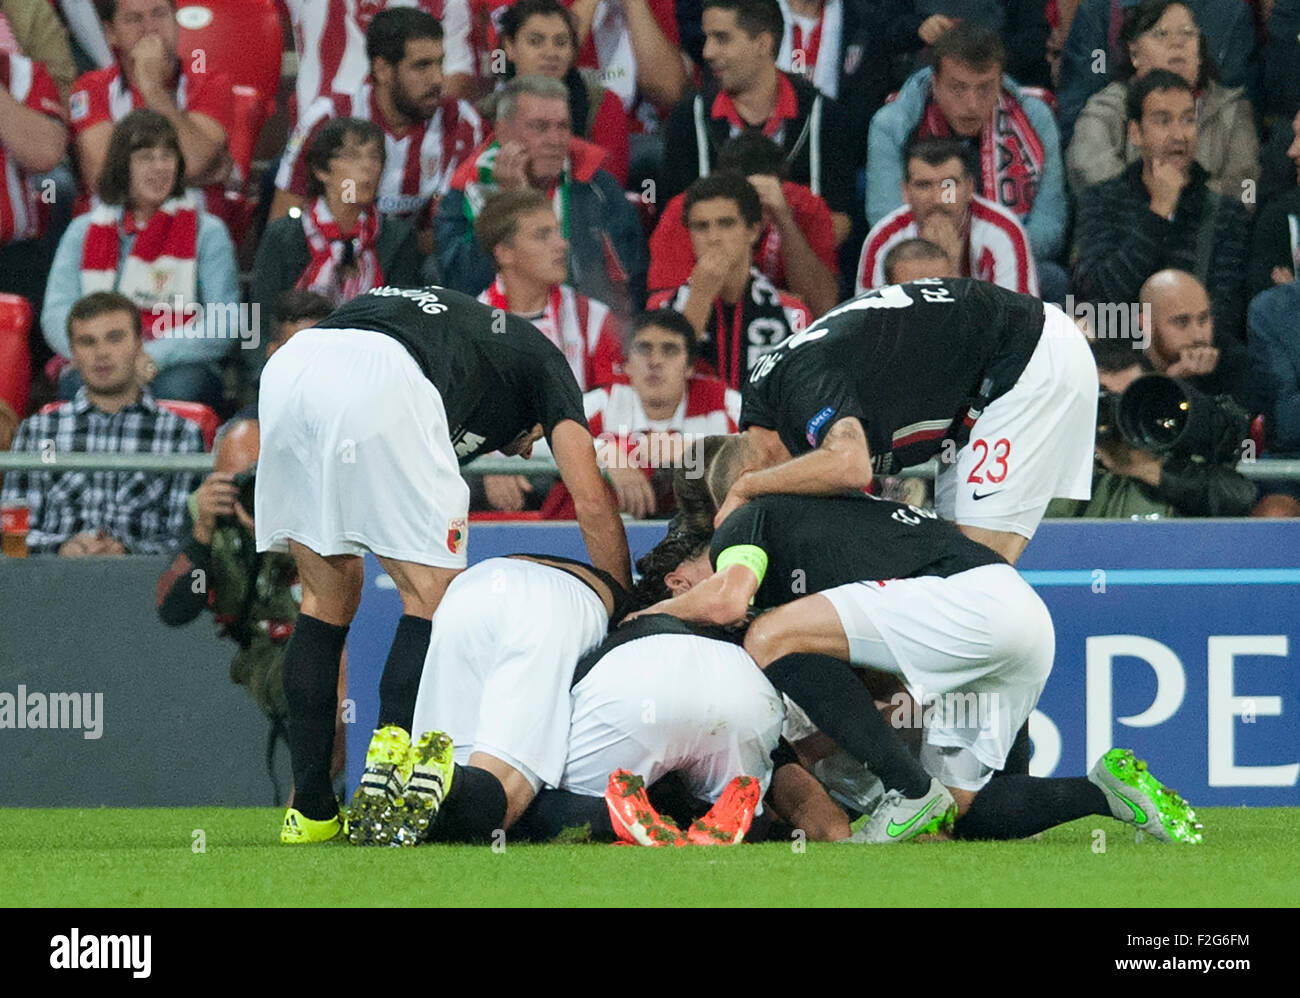 Bilbao, Spain. 17th Sep, 2015. Players of Augsburg celebrate after Altintop scored the 0-1 lead during the UEFA Europa League Group L soccer match between Athletic Bilbao and FC Augsburg at Estadio de San Mames in Bilbao, Spain, 17 September 2015. Photo: Juan Flor/dpa/Alamy Live News Stock Photo